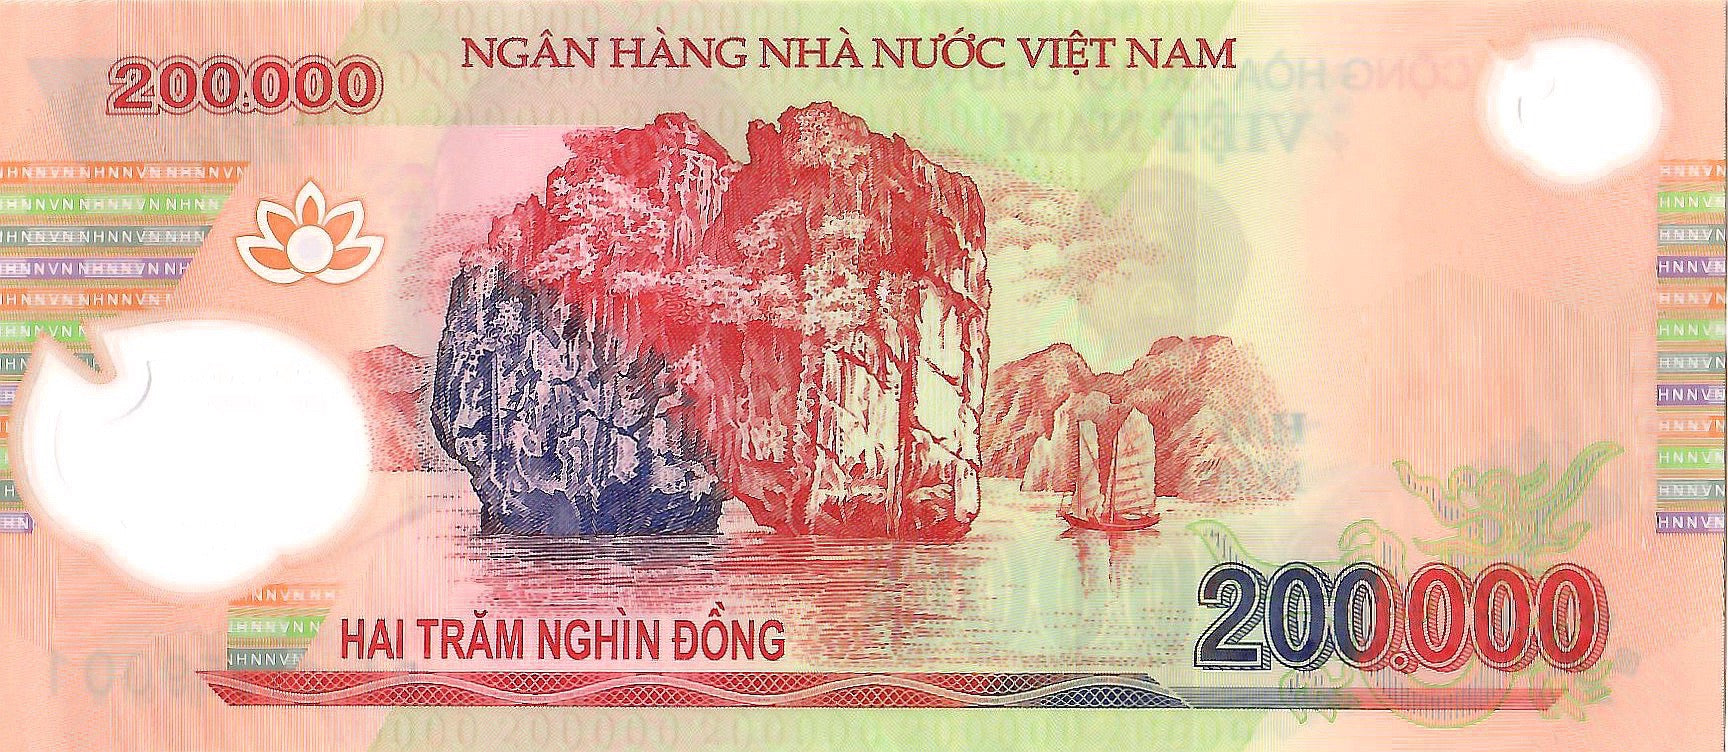 Vietnam 200,000 Dong Banknote, 2021, P-123l, UNC, Polymer